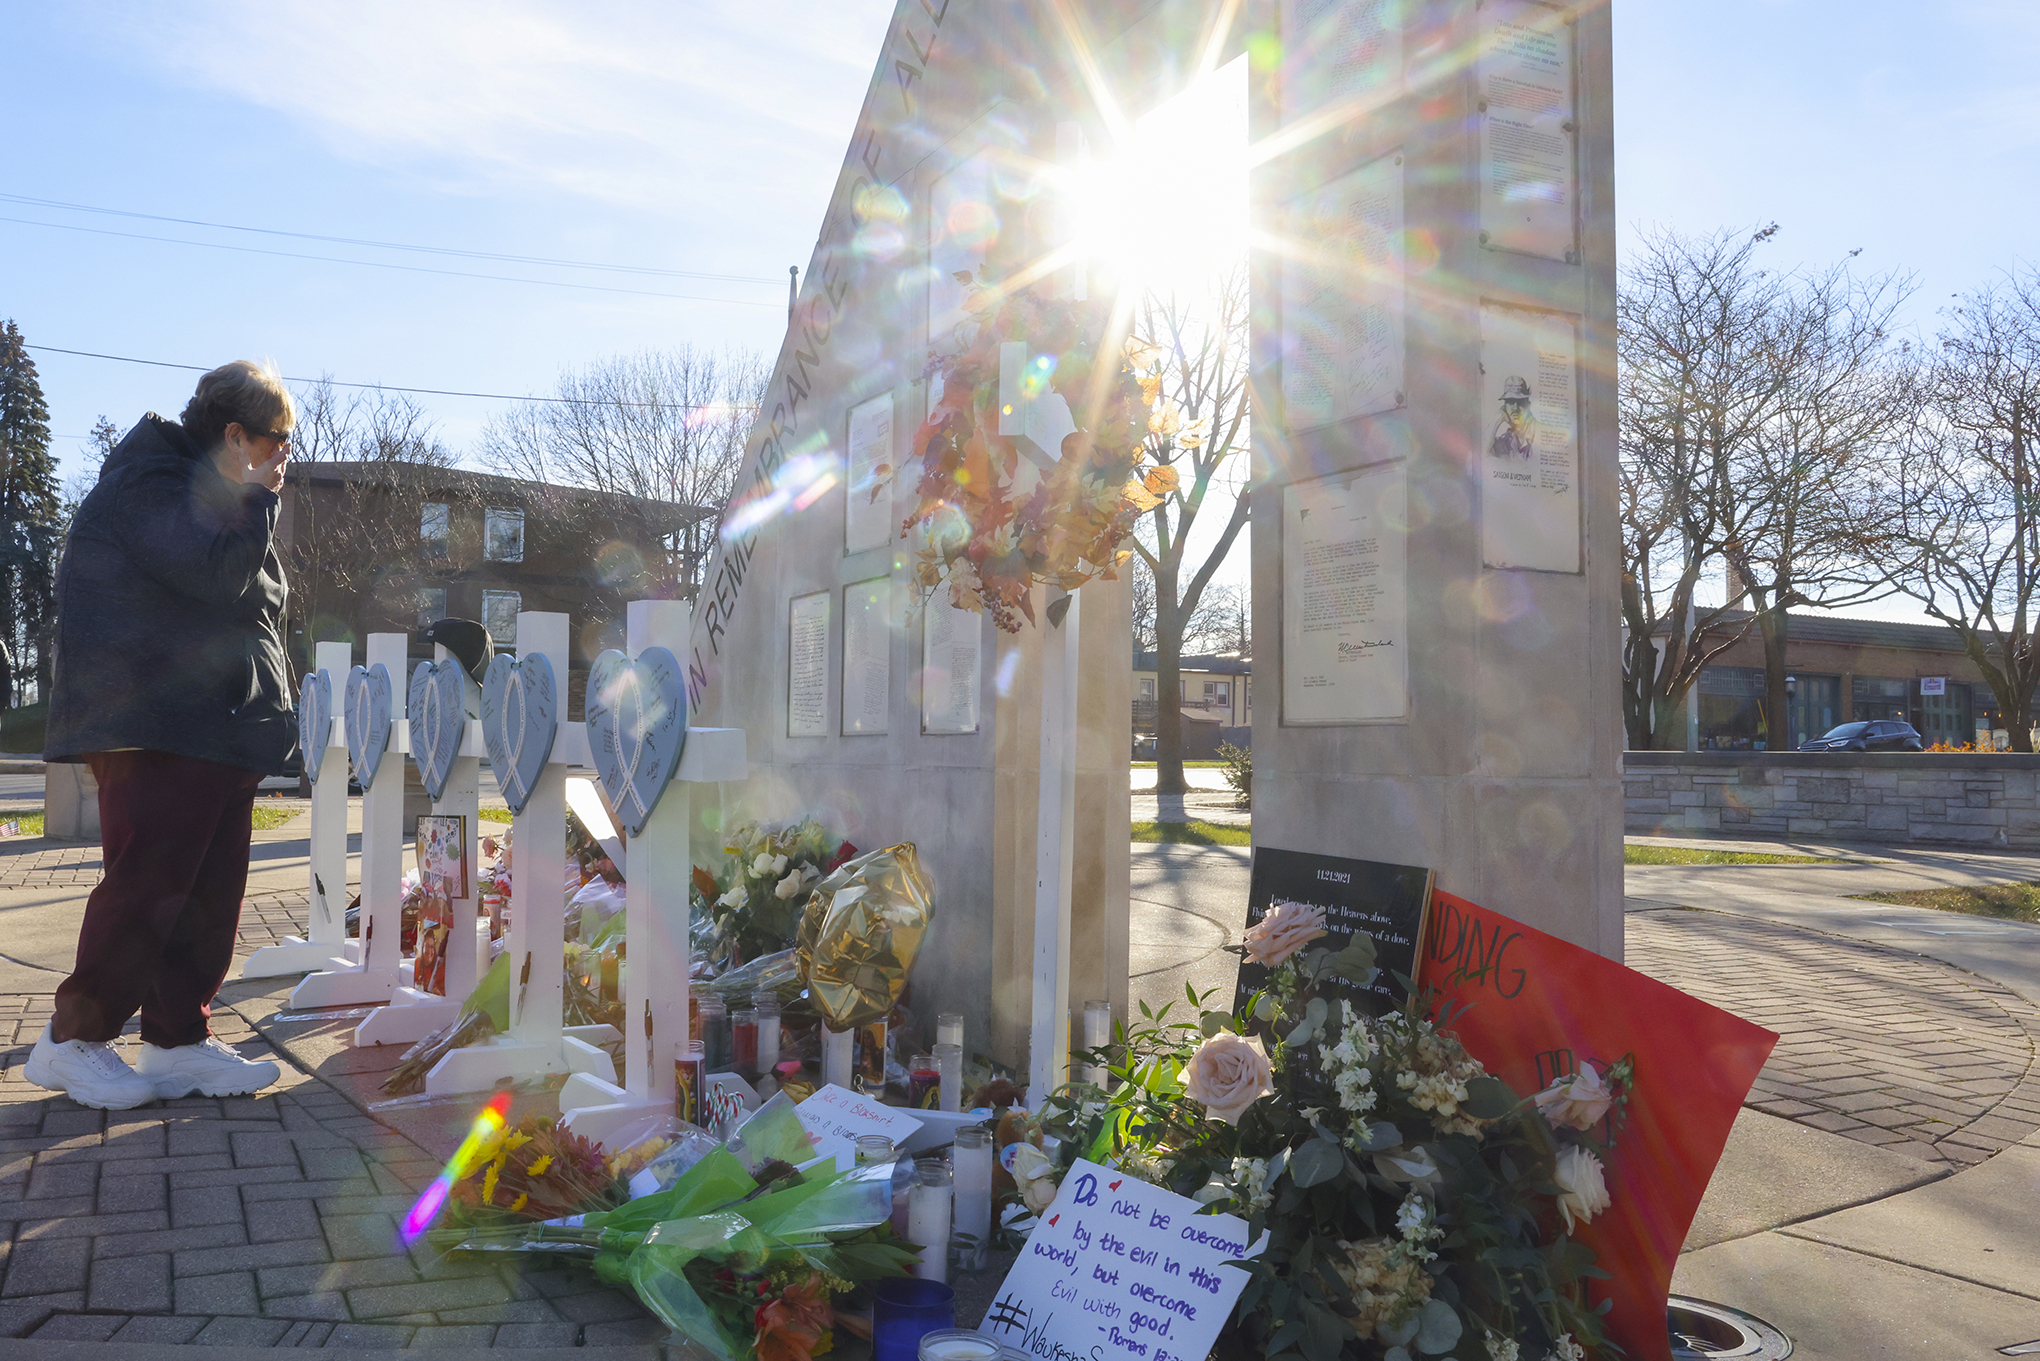 A person cries at a memorial in Waukesha, Wis.